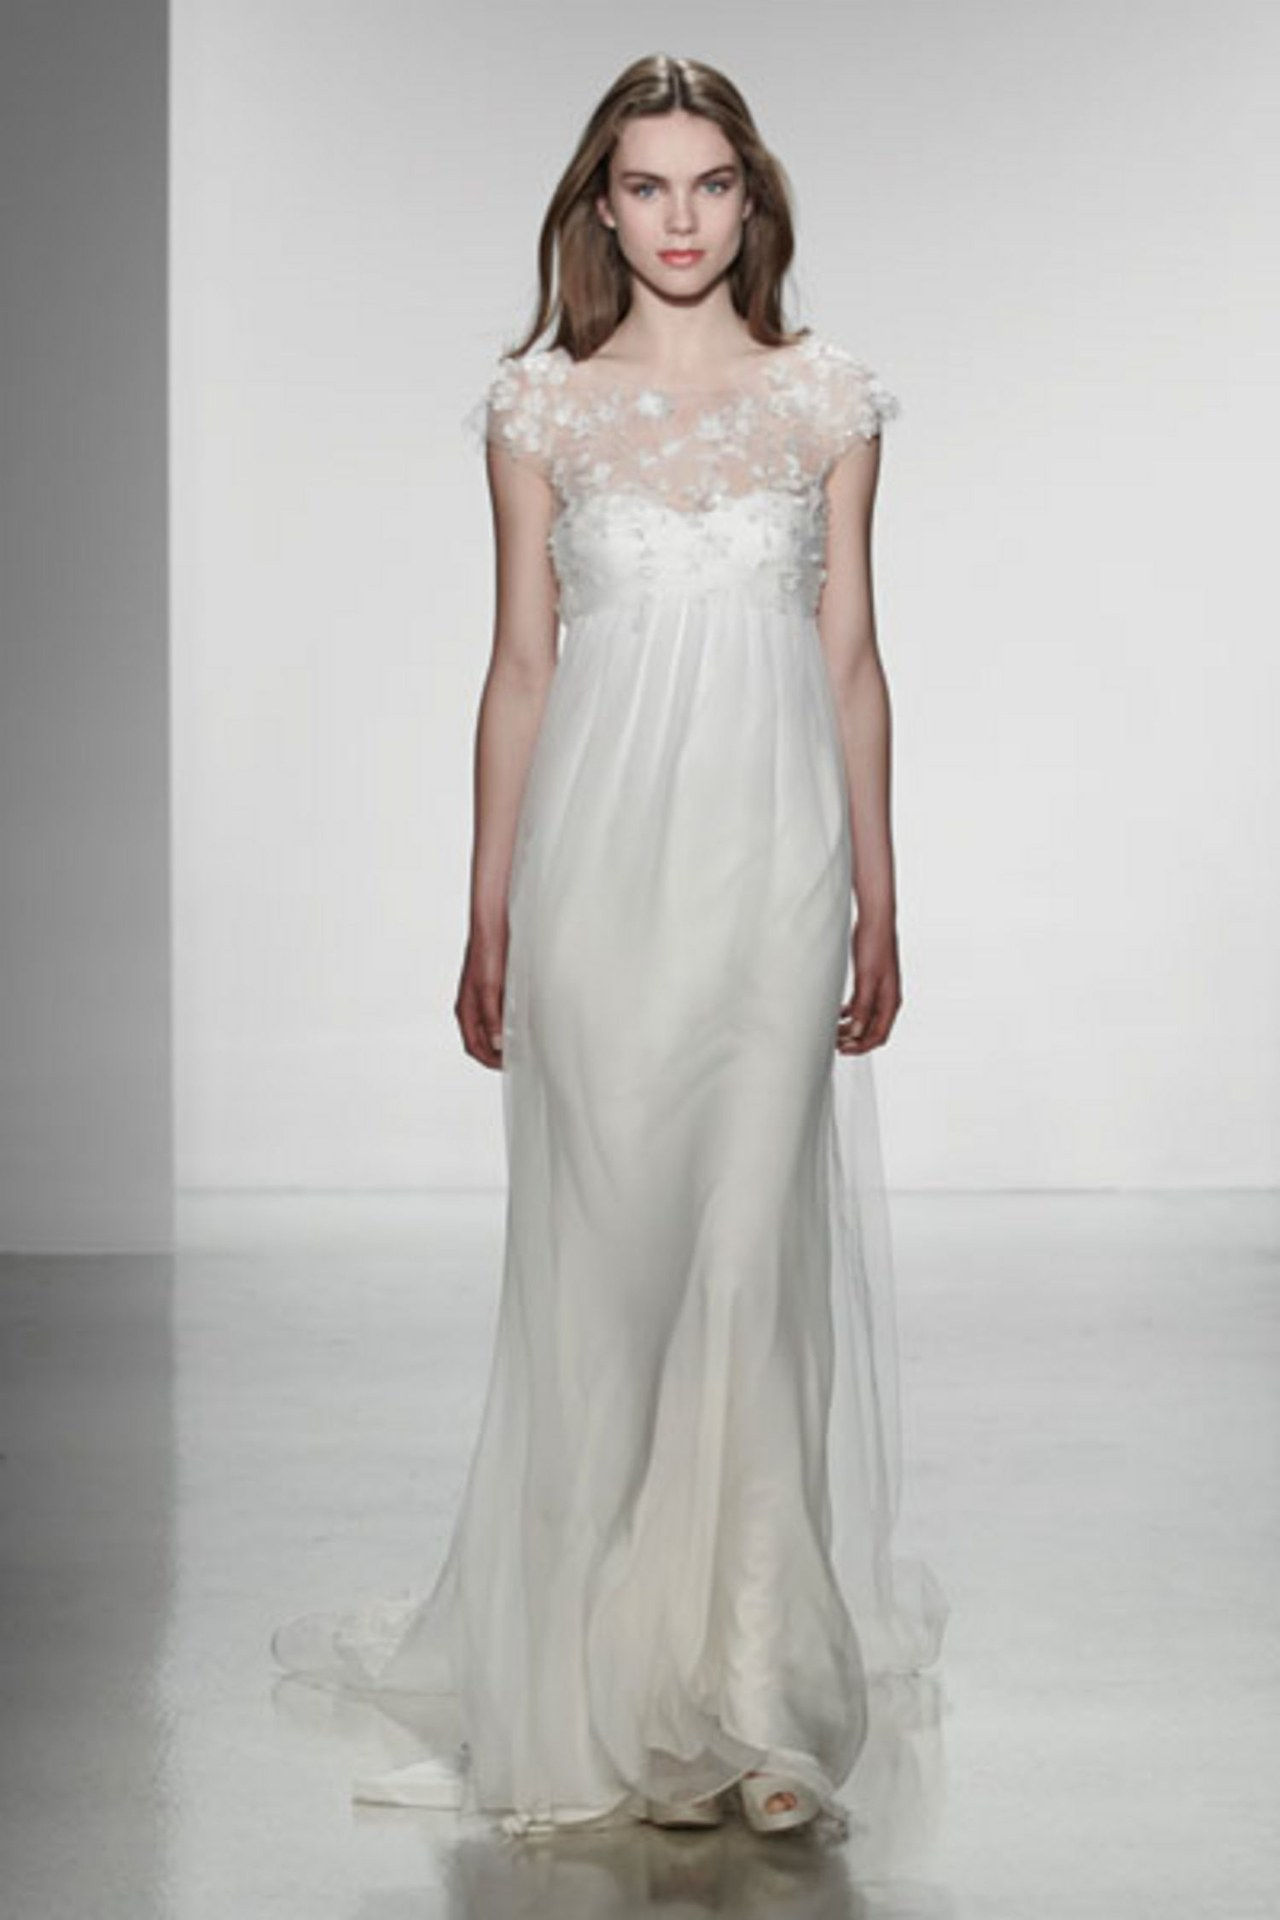 3 wedding dresses for outdoor brides anna kendrick the last five years wedding gown 0709